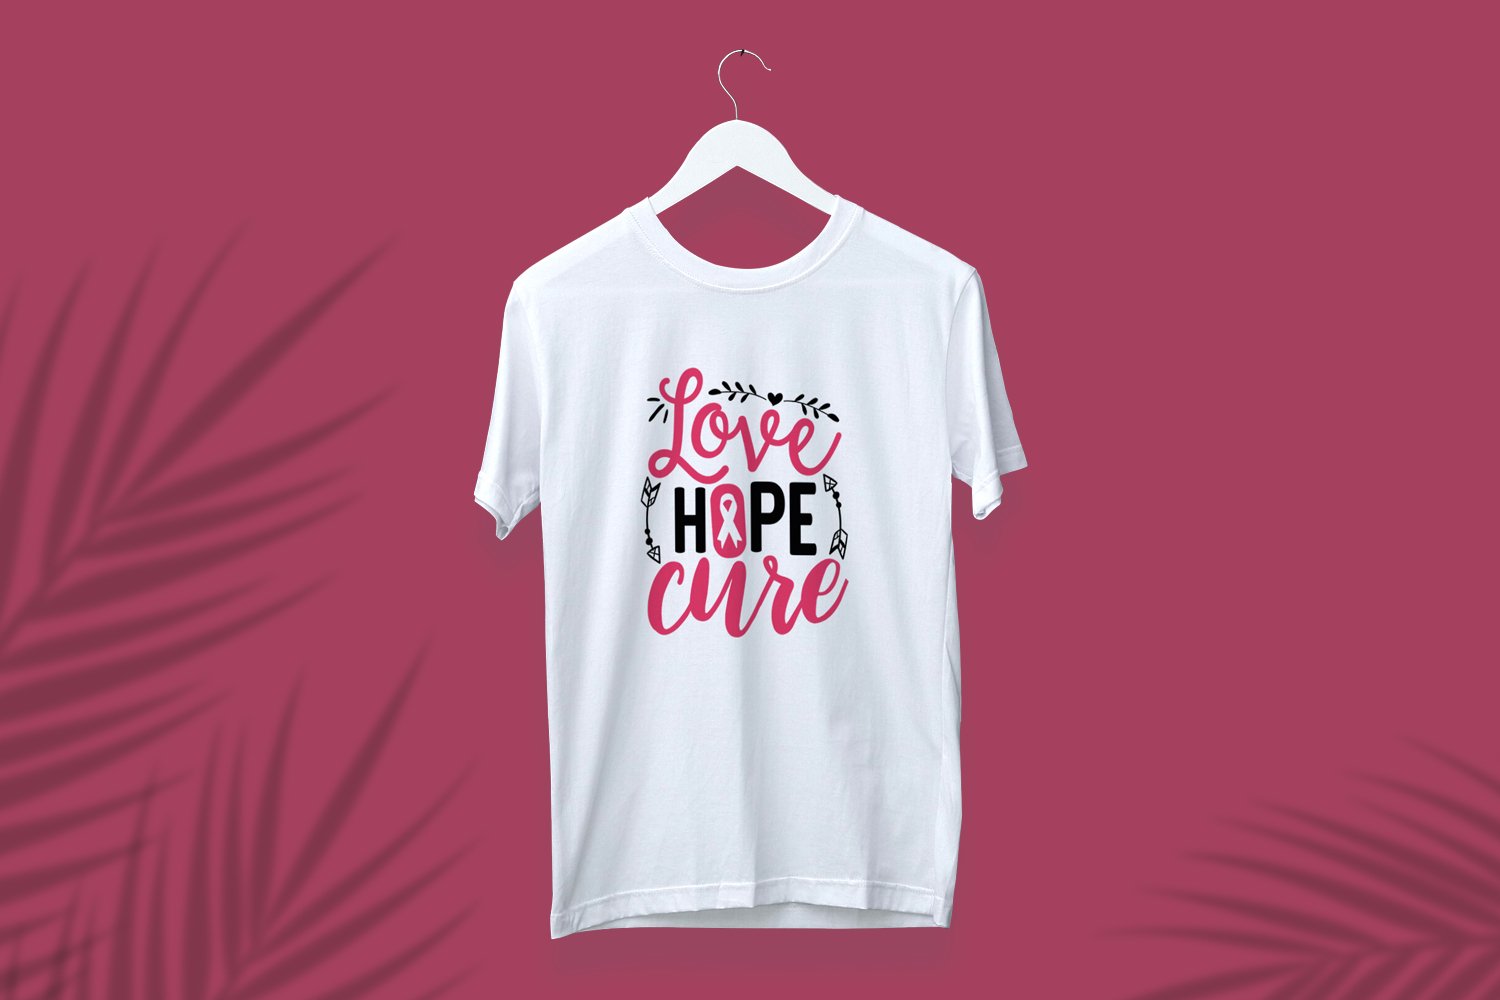 Classic white t-shirt with breast cancer graphic.